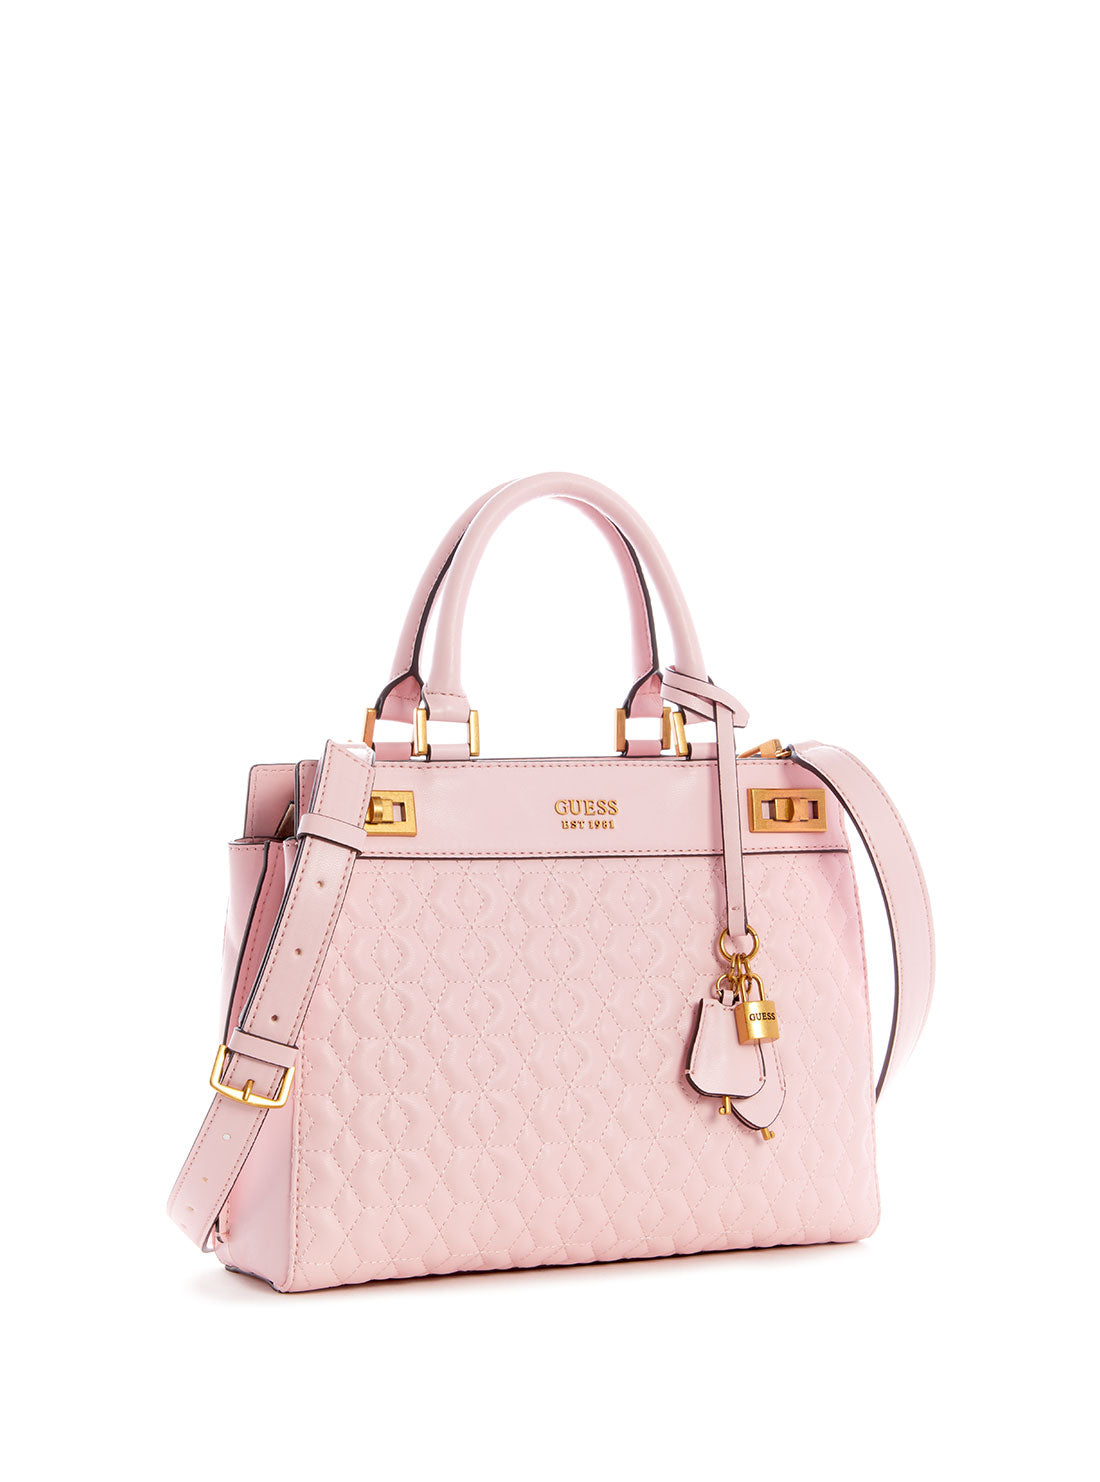 GUESS Women's Pink Katey Luxury Satchel Bag DB787026 Front Side View